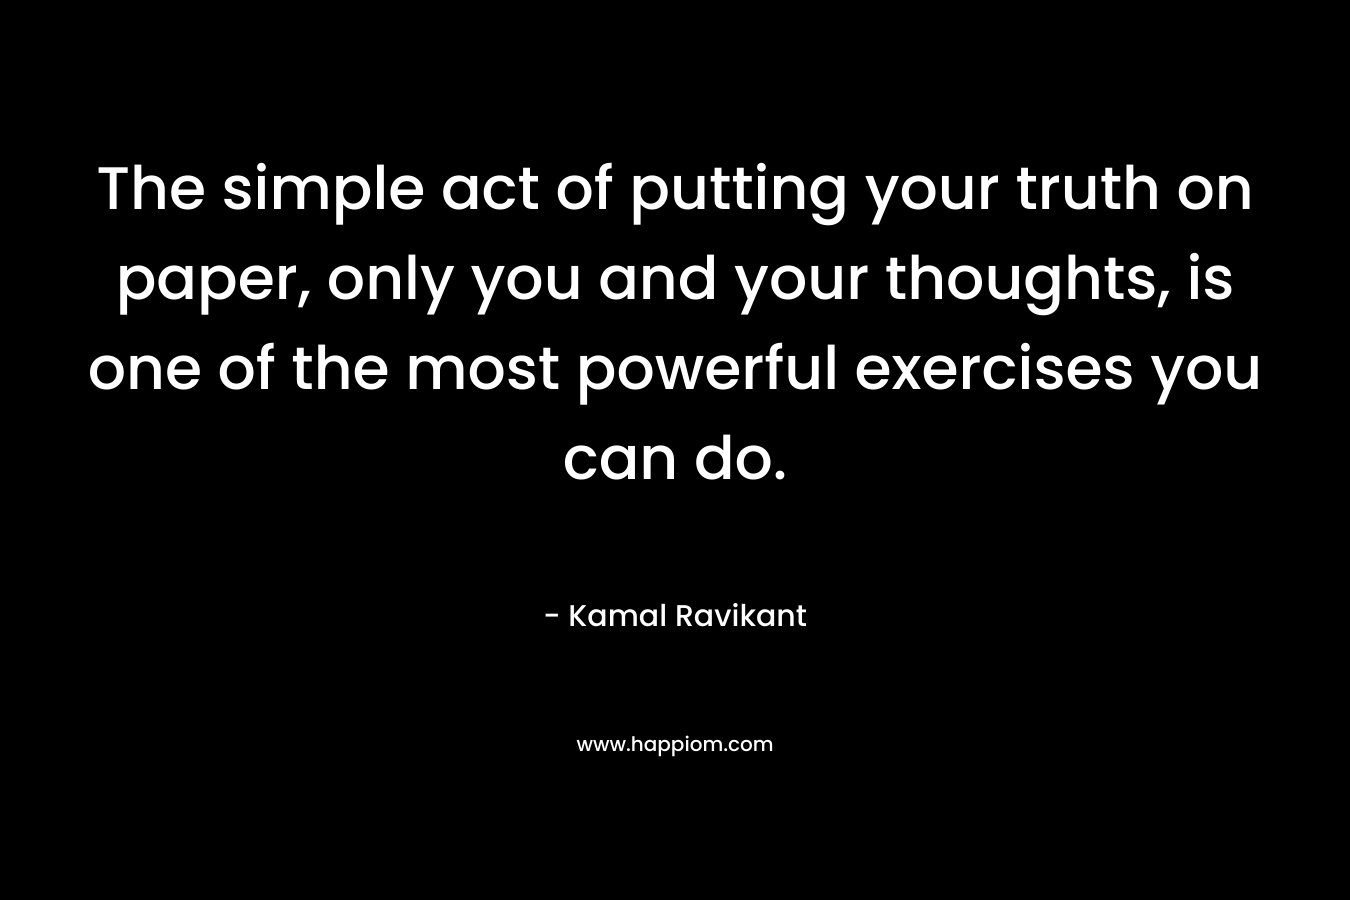 The simple act of putting your truth on paper, only you and your thoughts, is one of the most powerful exercises you can do.